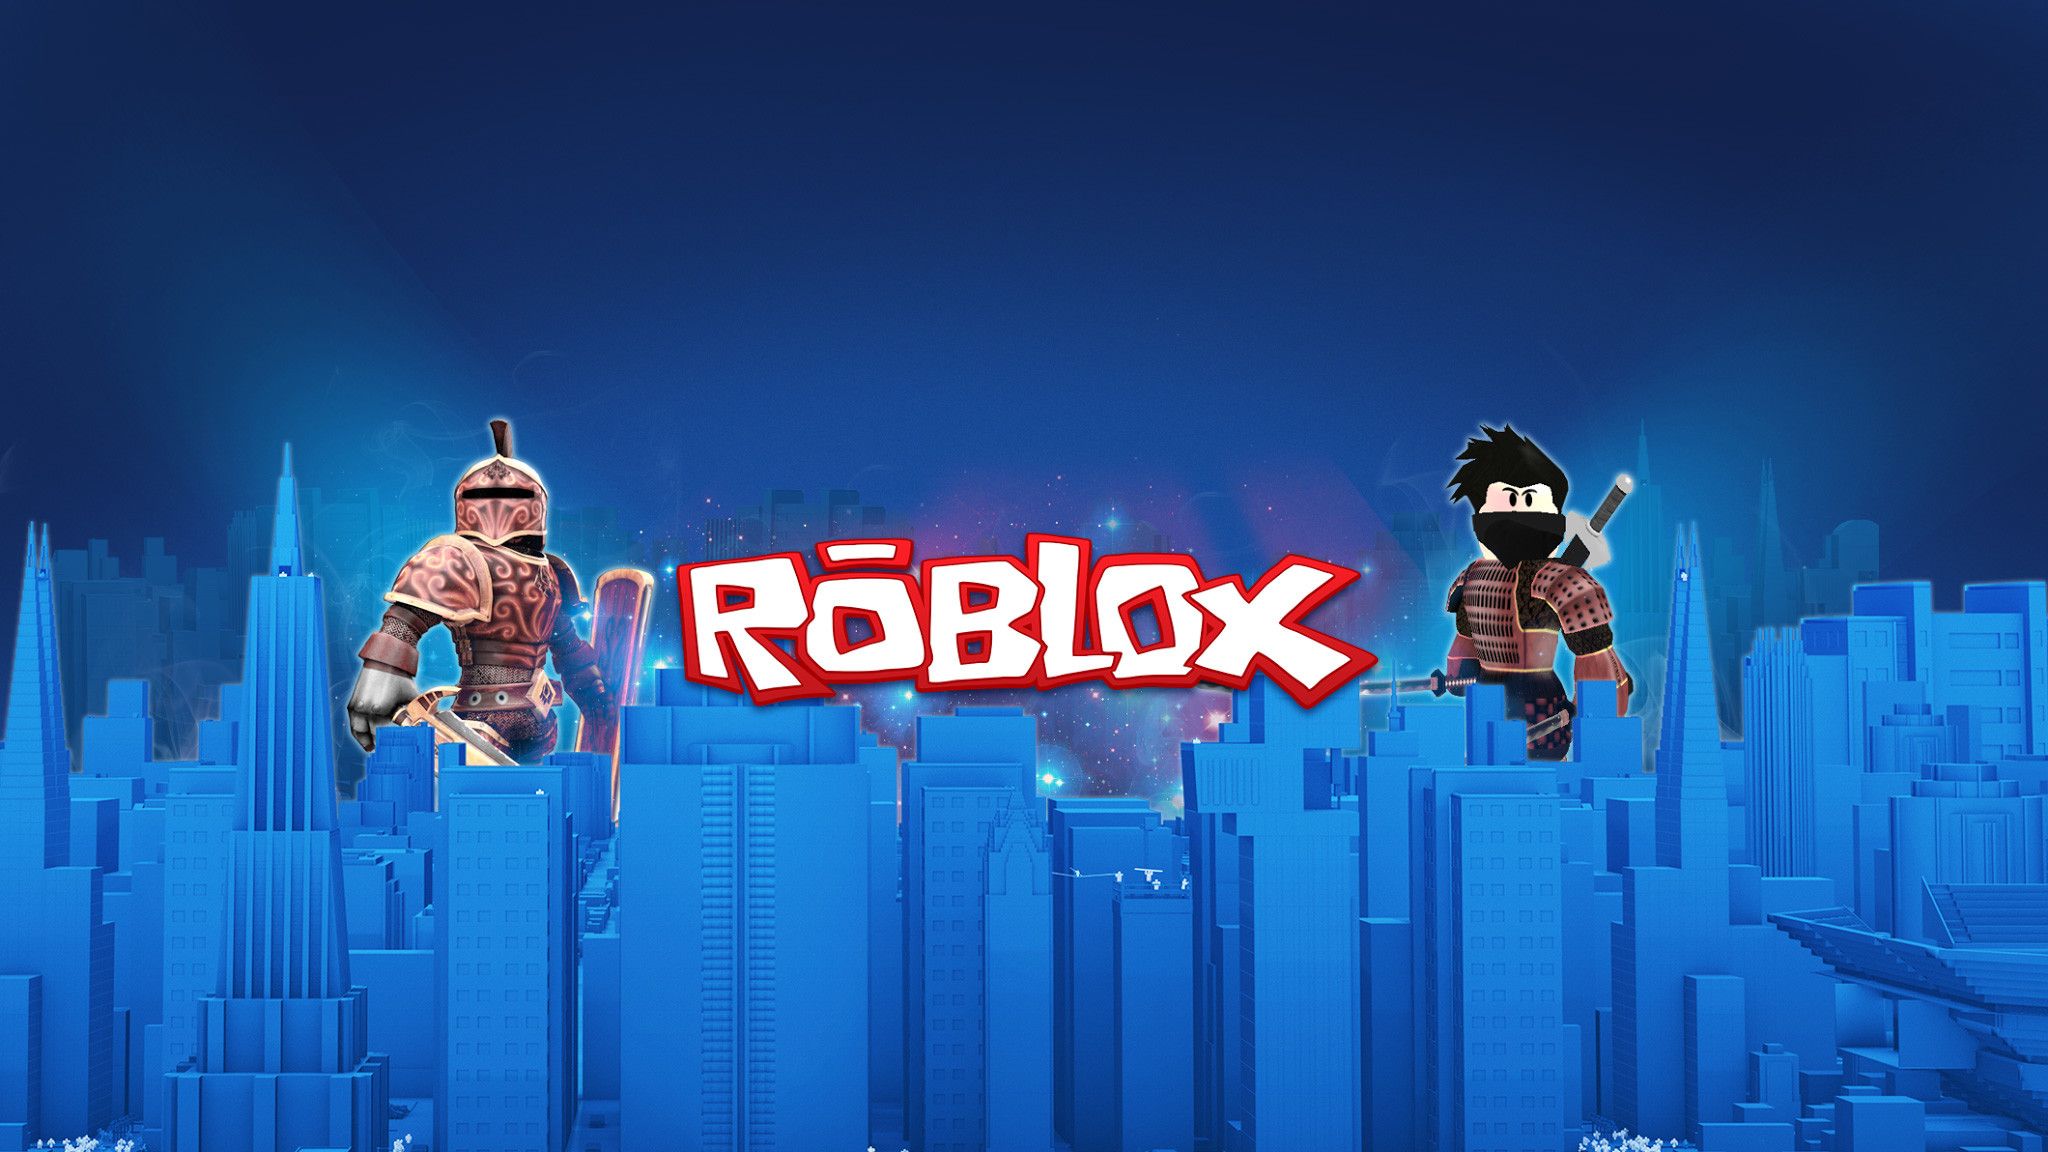 Roblox Wallpaper Hd Kolpaper Awesome Free Hd Wallpapers - awesome background roblox